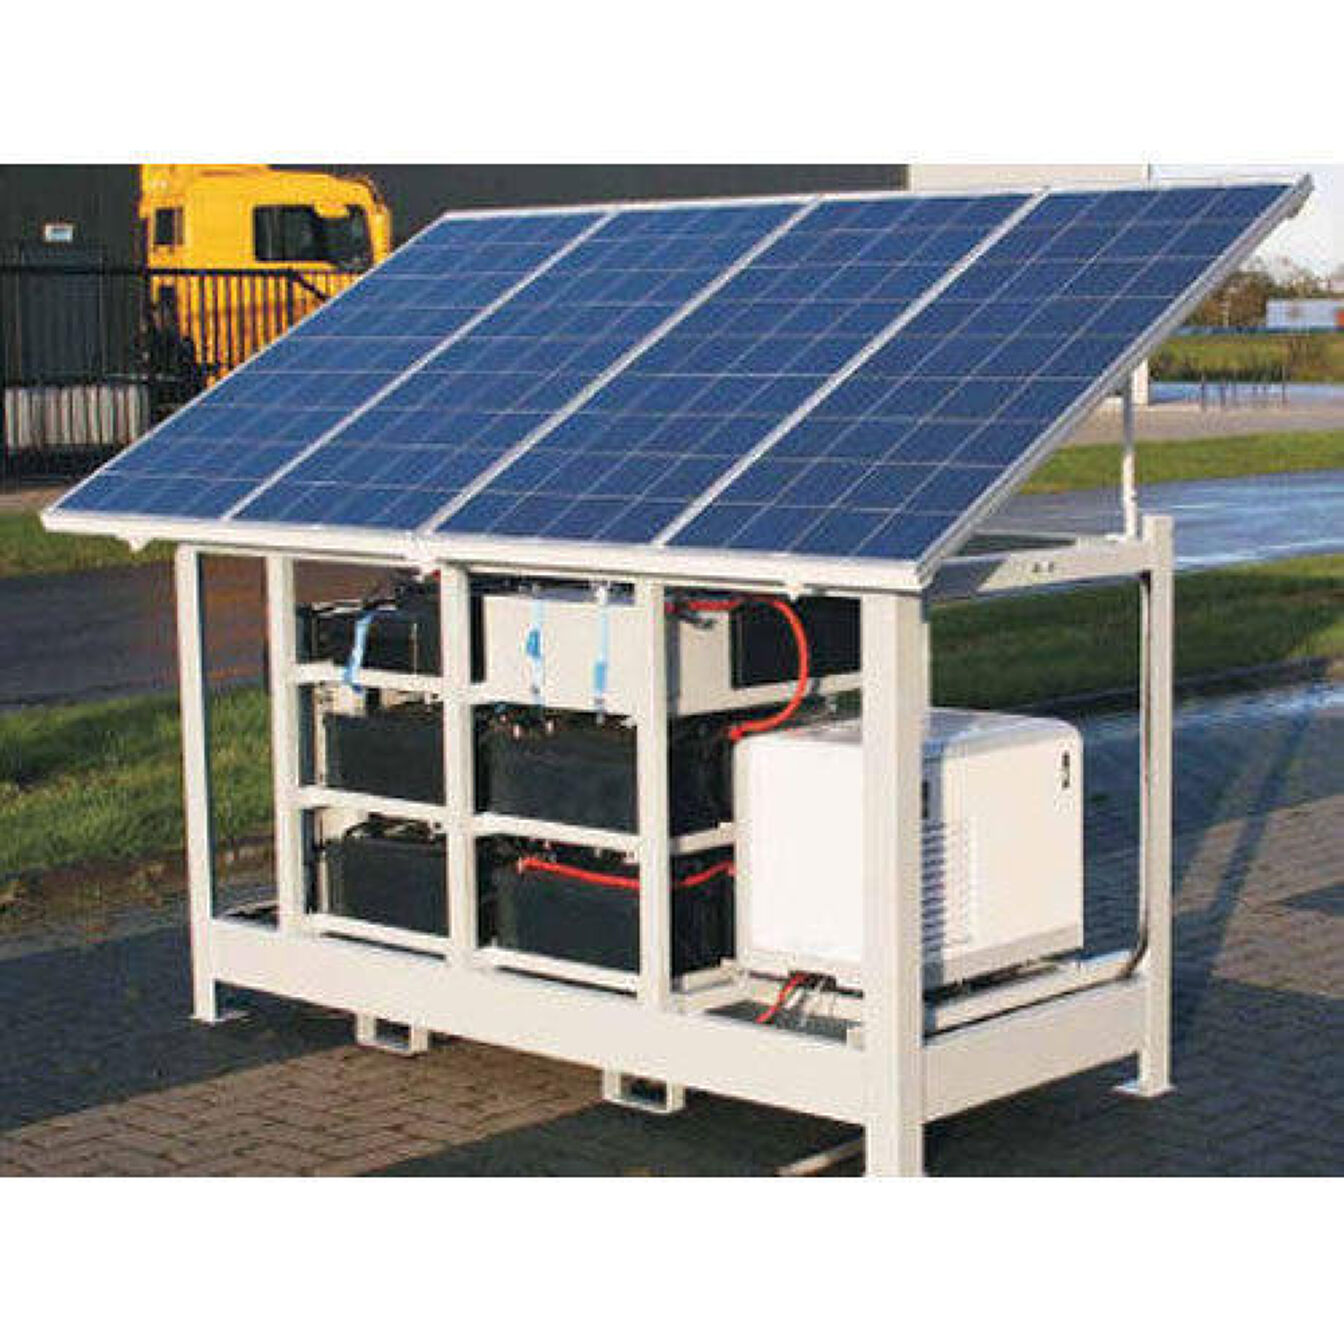 Mounting Equipment for OffGrid Solar Systems